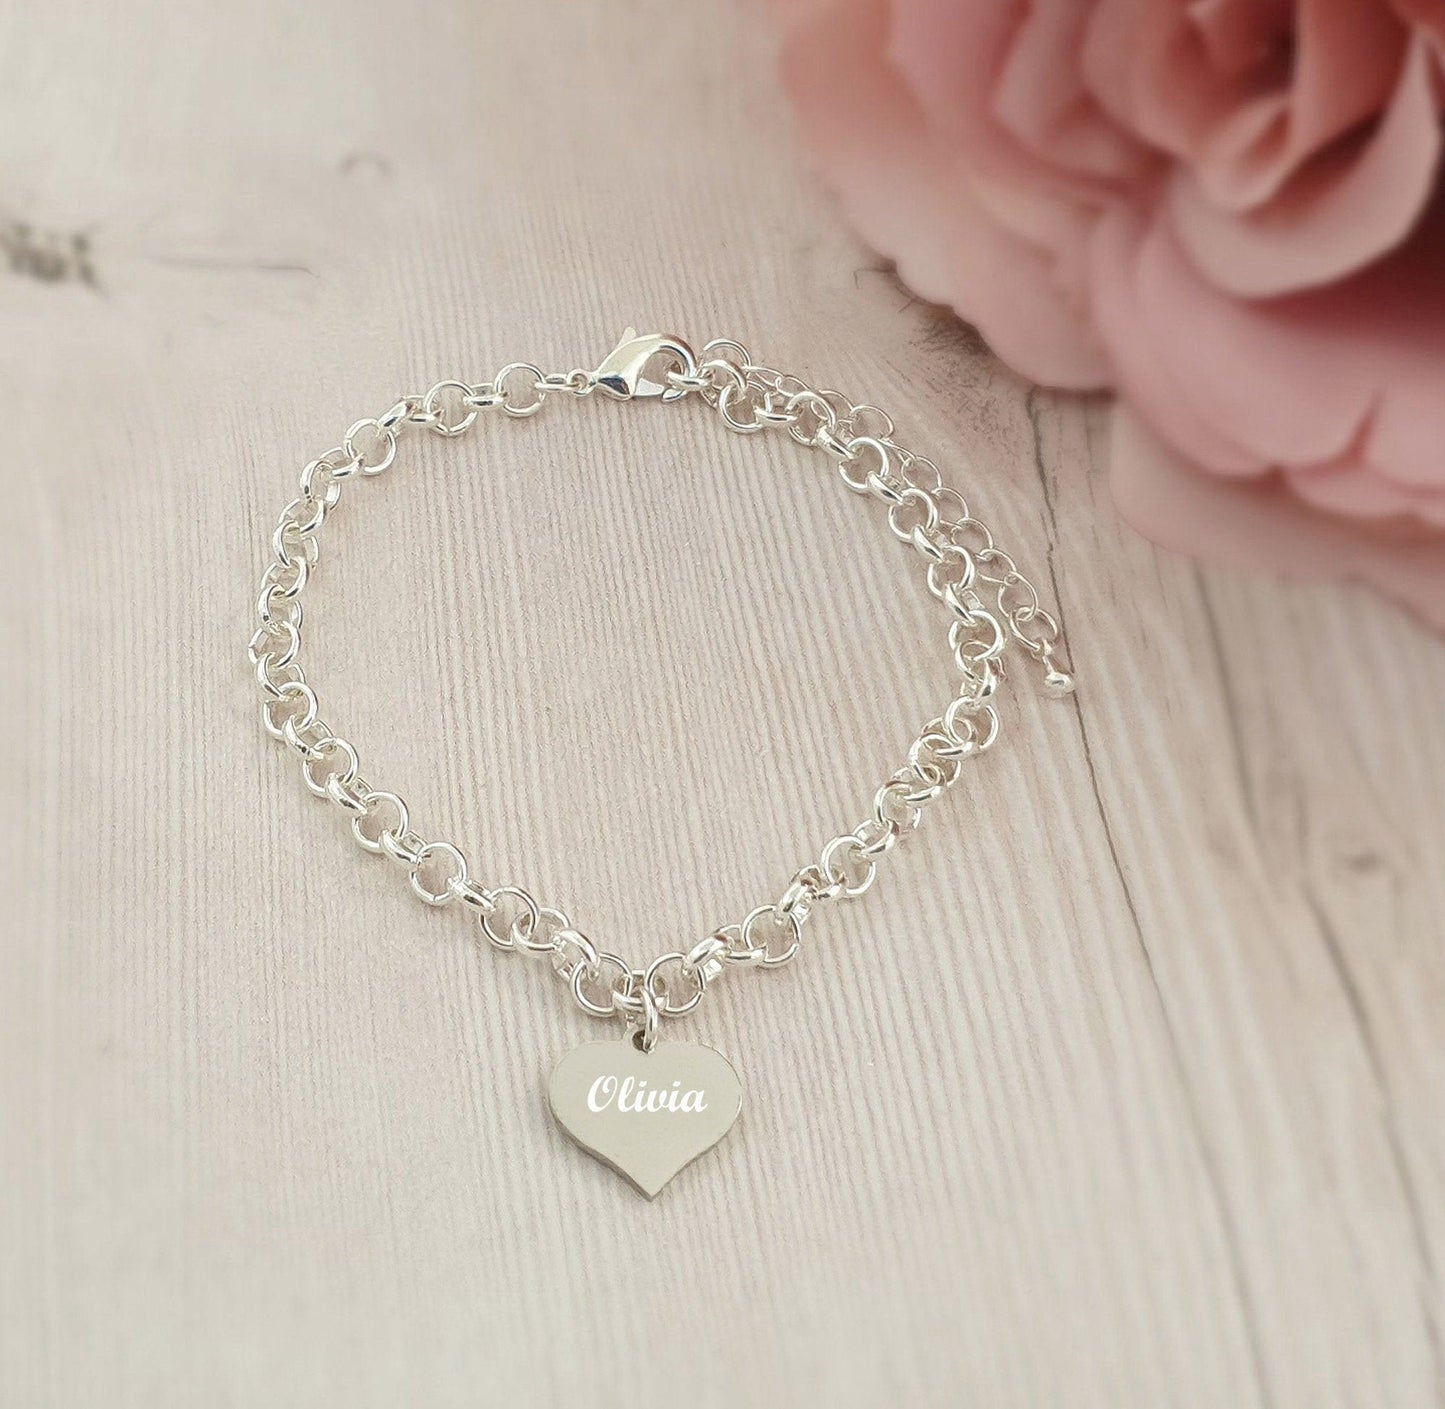 SanaBelle™ Personalised Engraved Name Heart Charm Link Bracelet - Birthday Gift - Available in Various Sizes